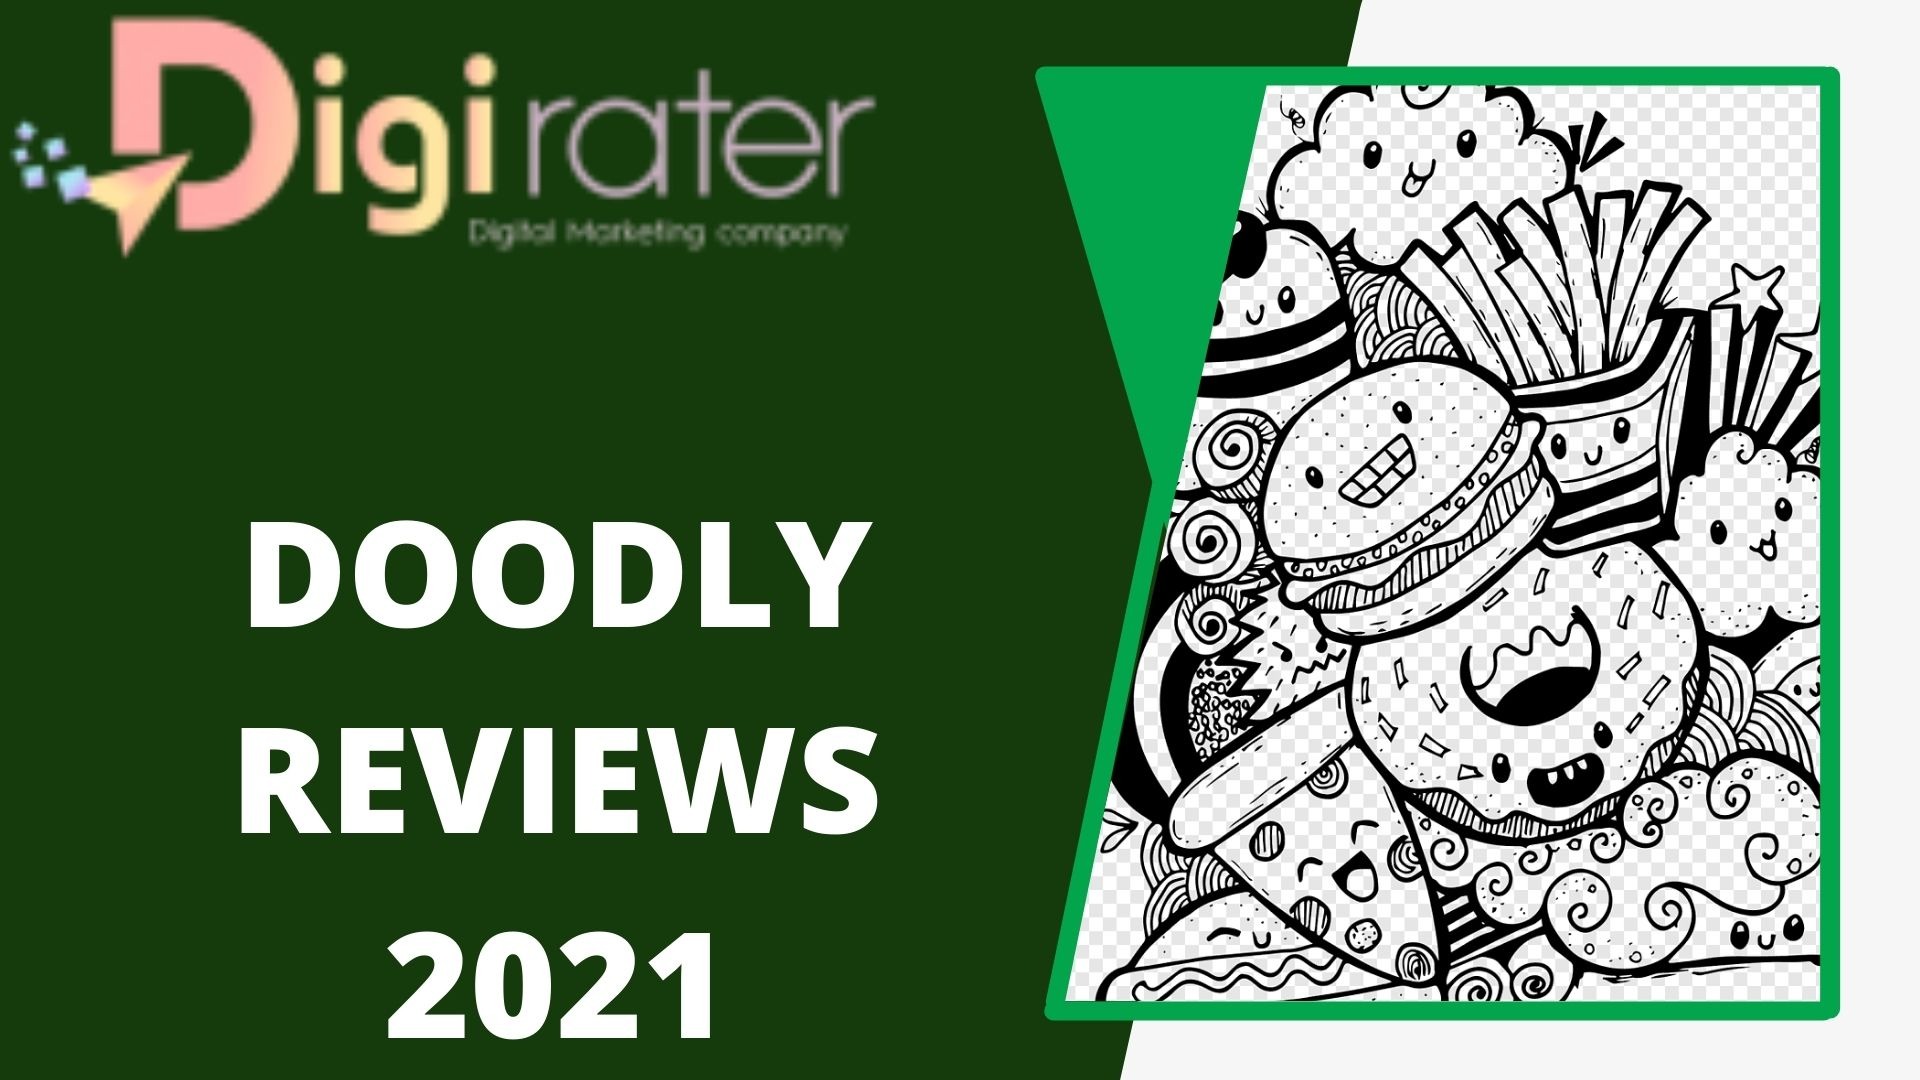 Doodly Reviews The Best Animation Software Telegraph